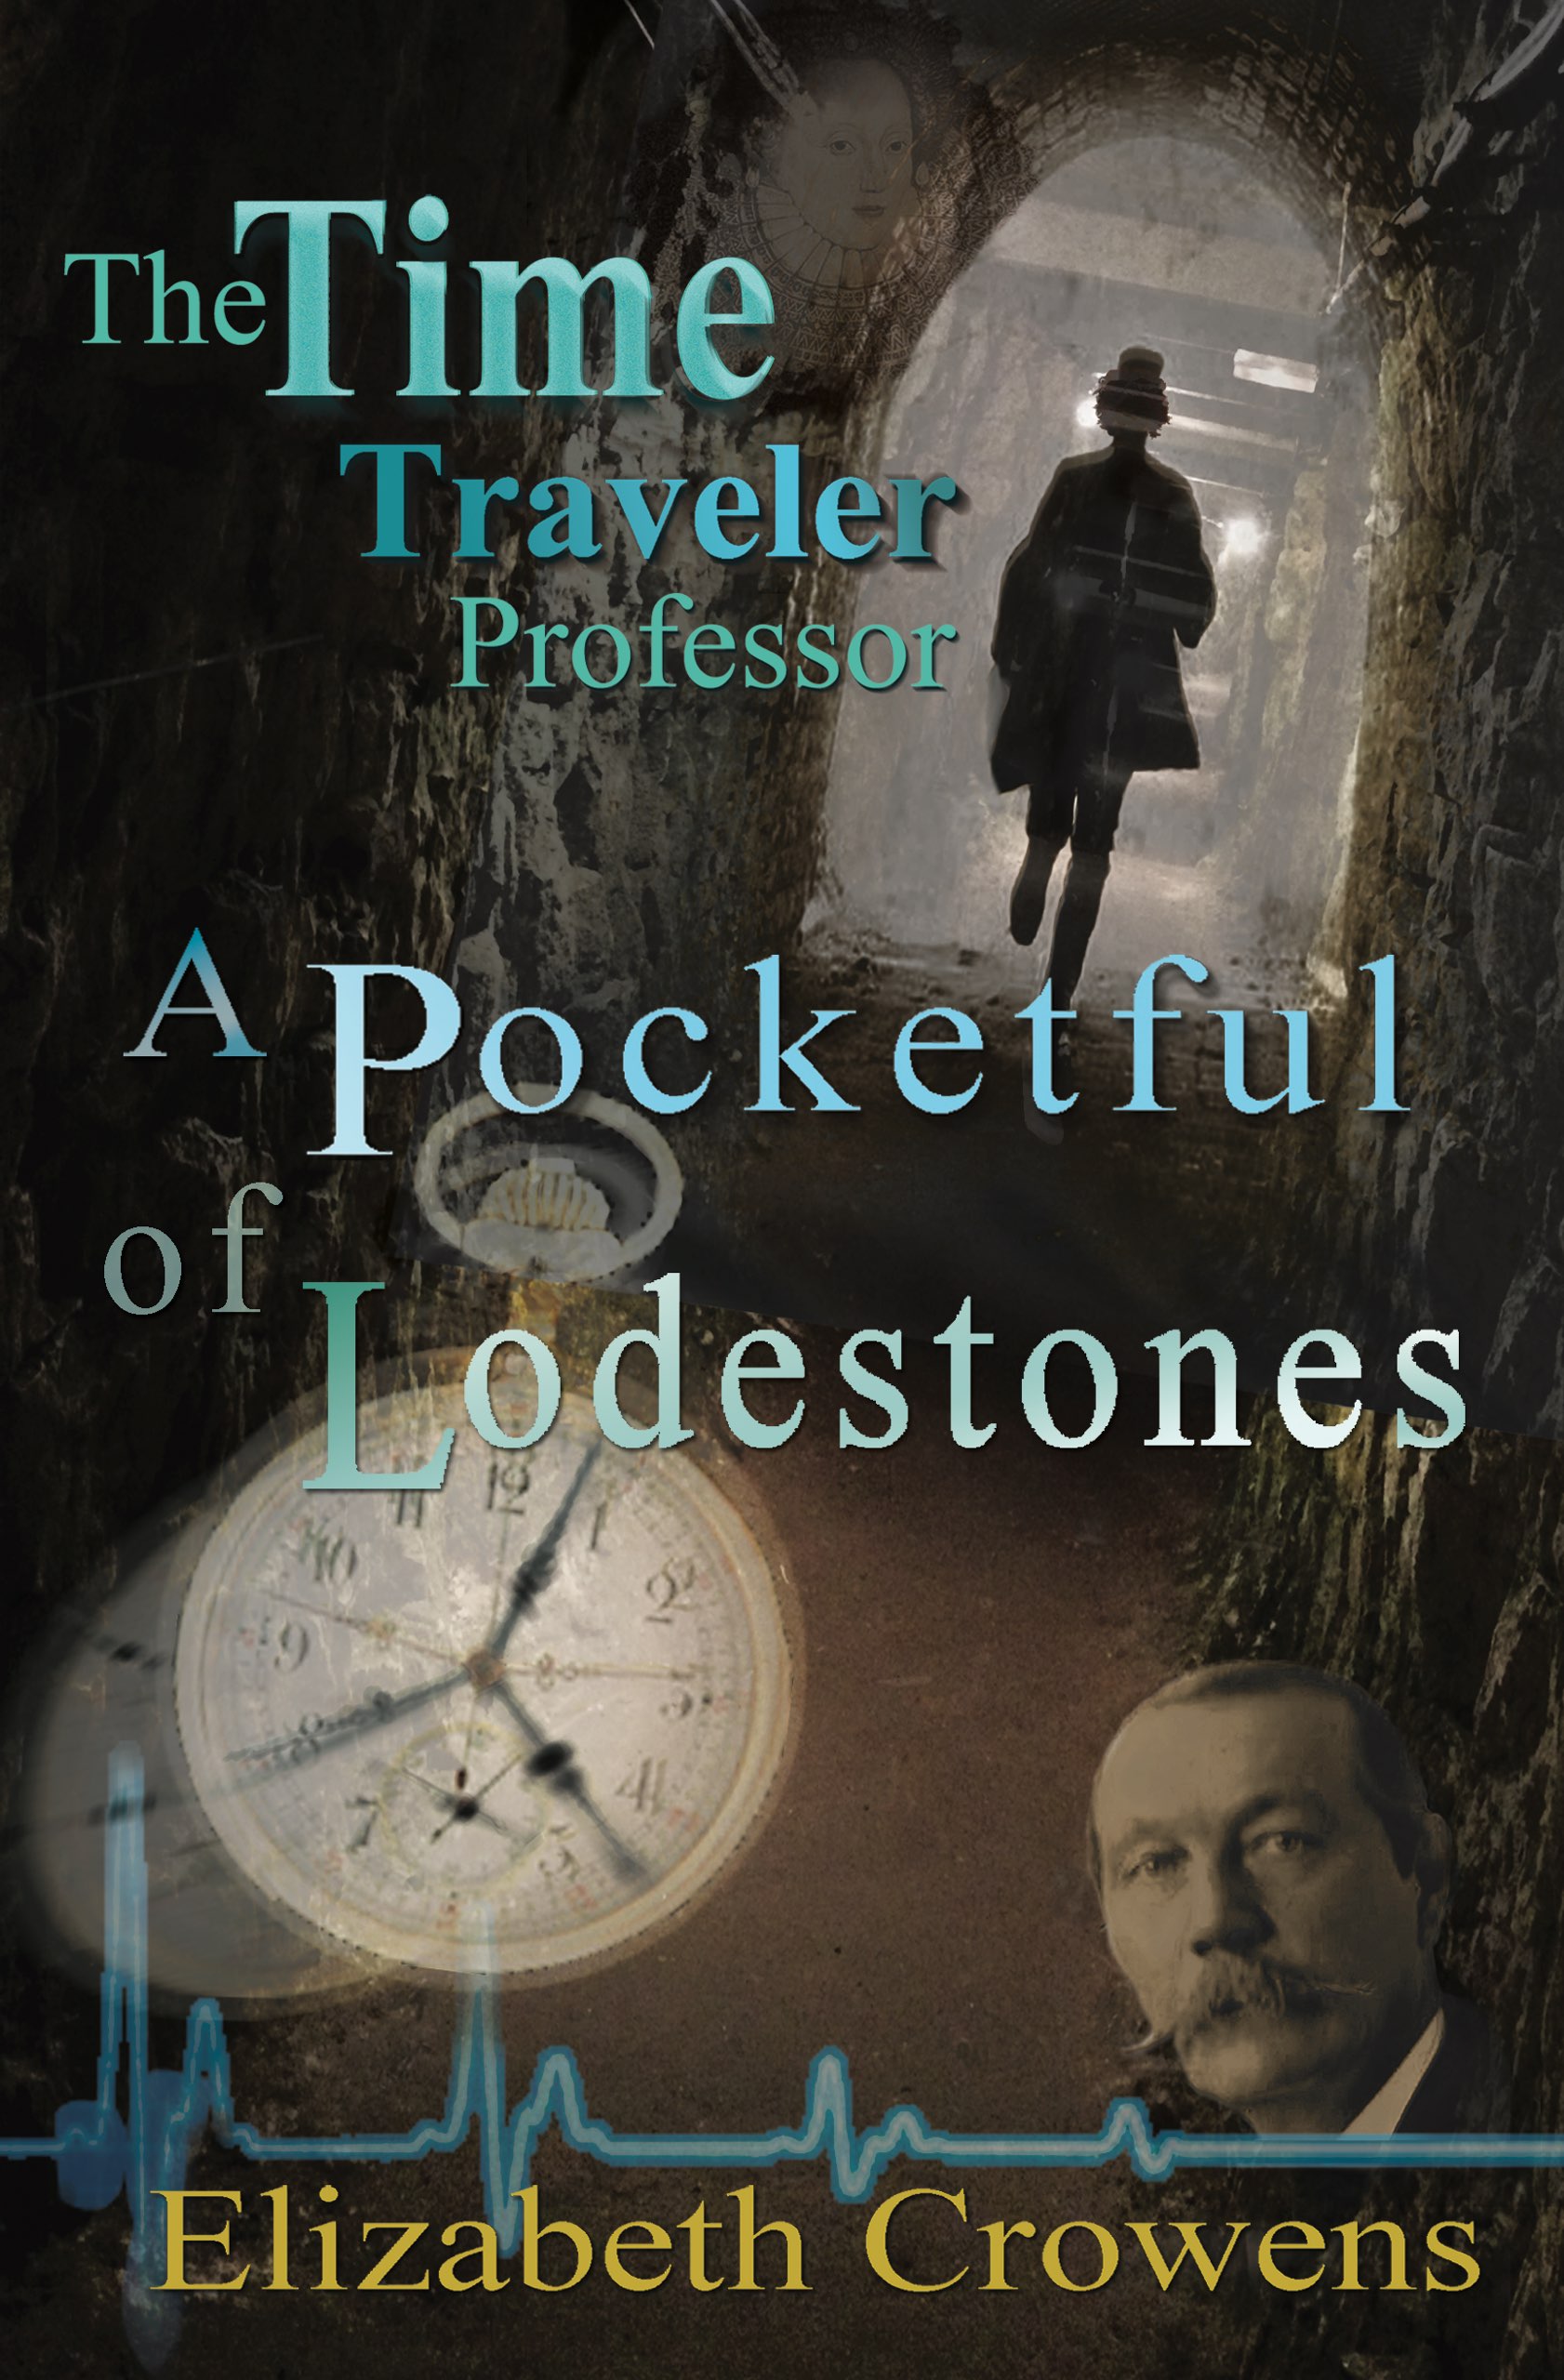 The Time Traveler Professor, Book Two: A Pocketful of Lodestones by Elizabeth Crowens